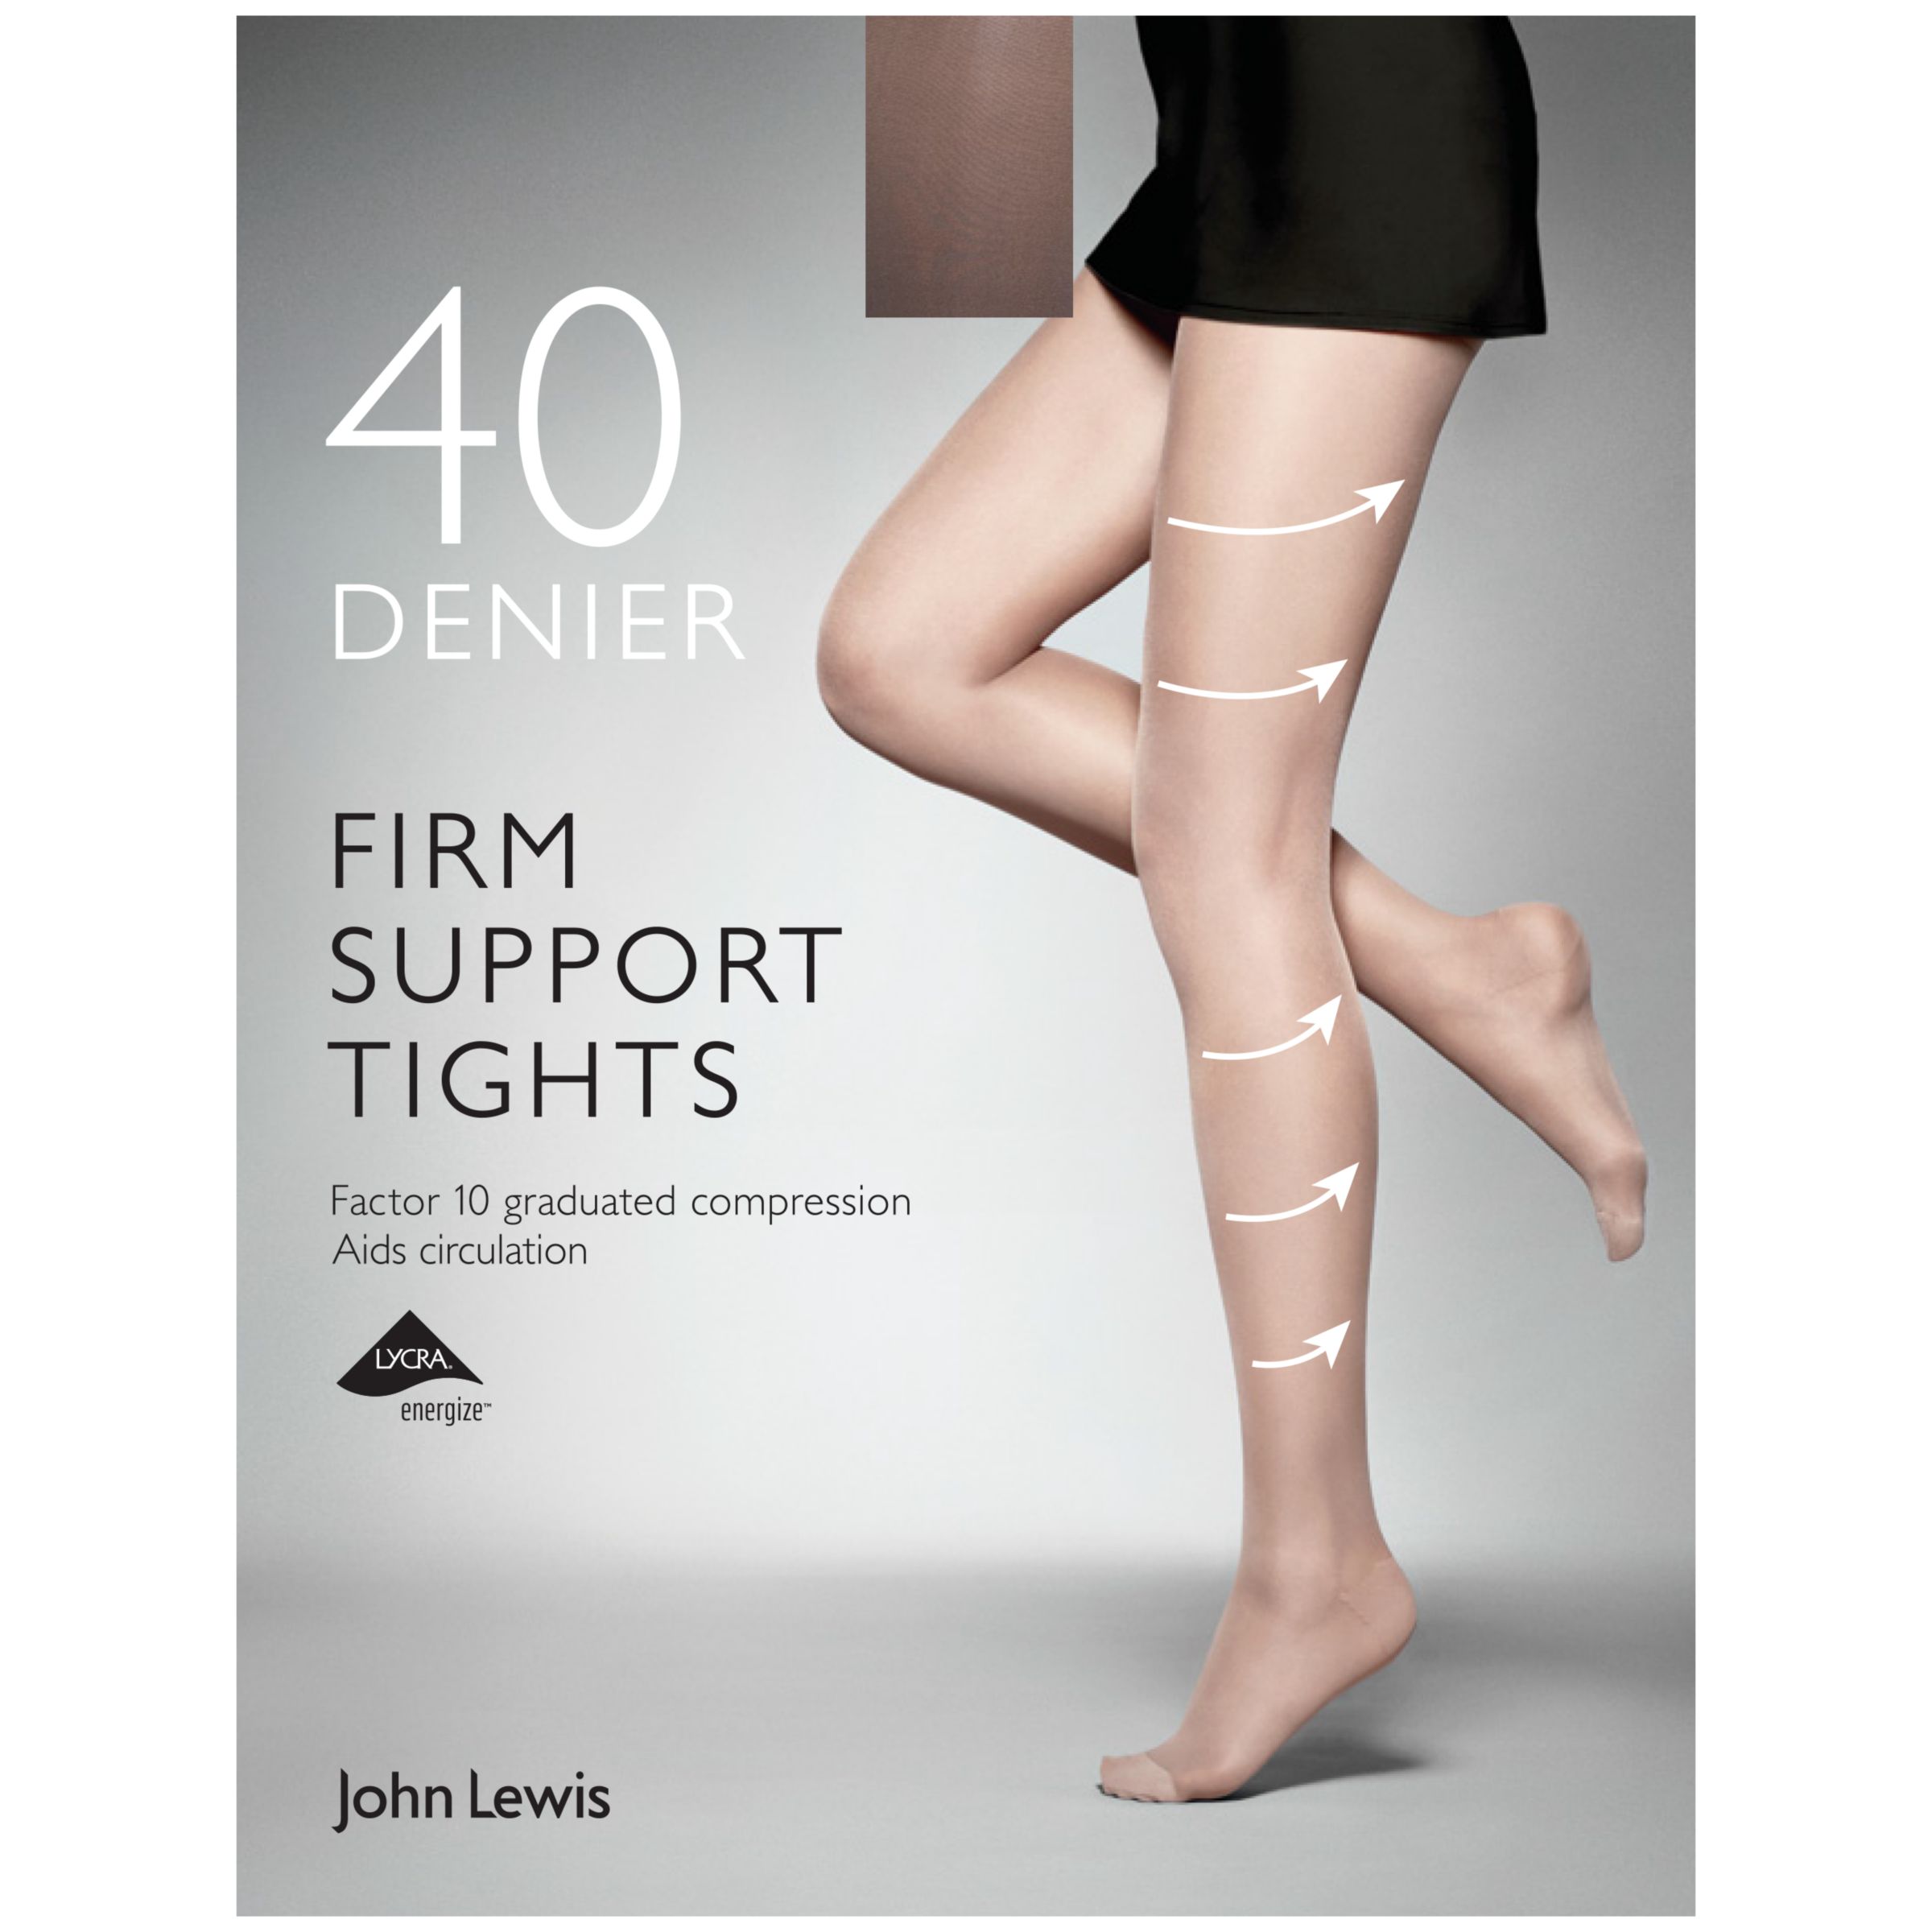 John Lewis 40 Denier Firm Support Tights, Nearly Black, S